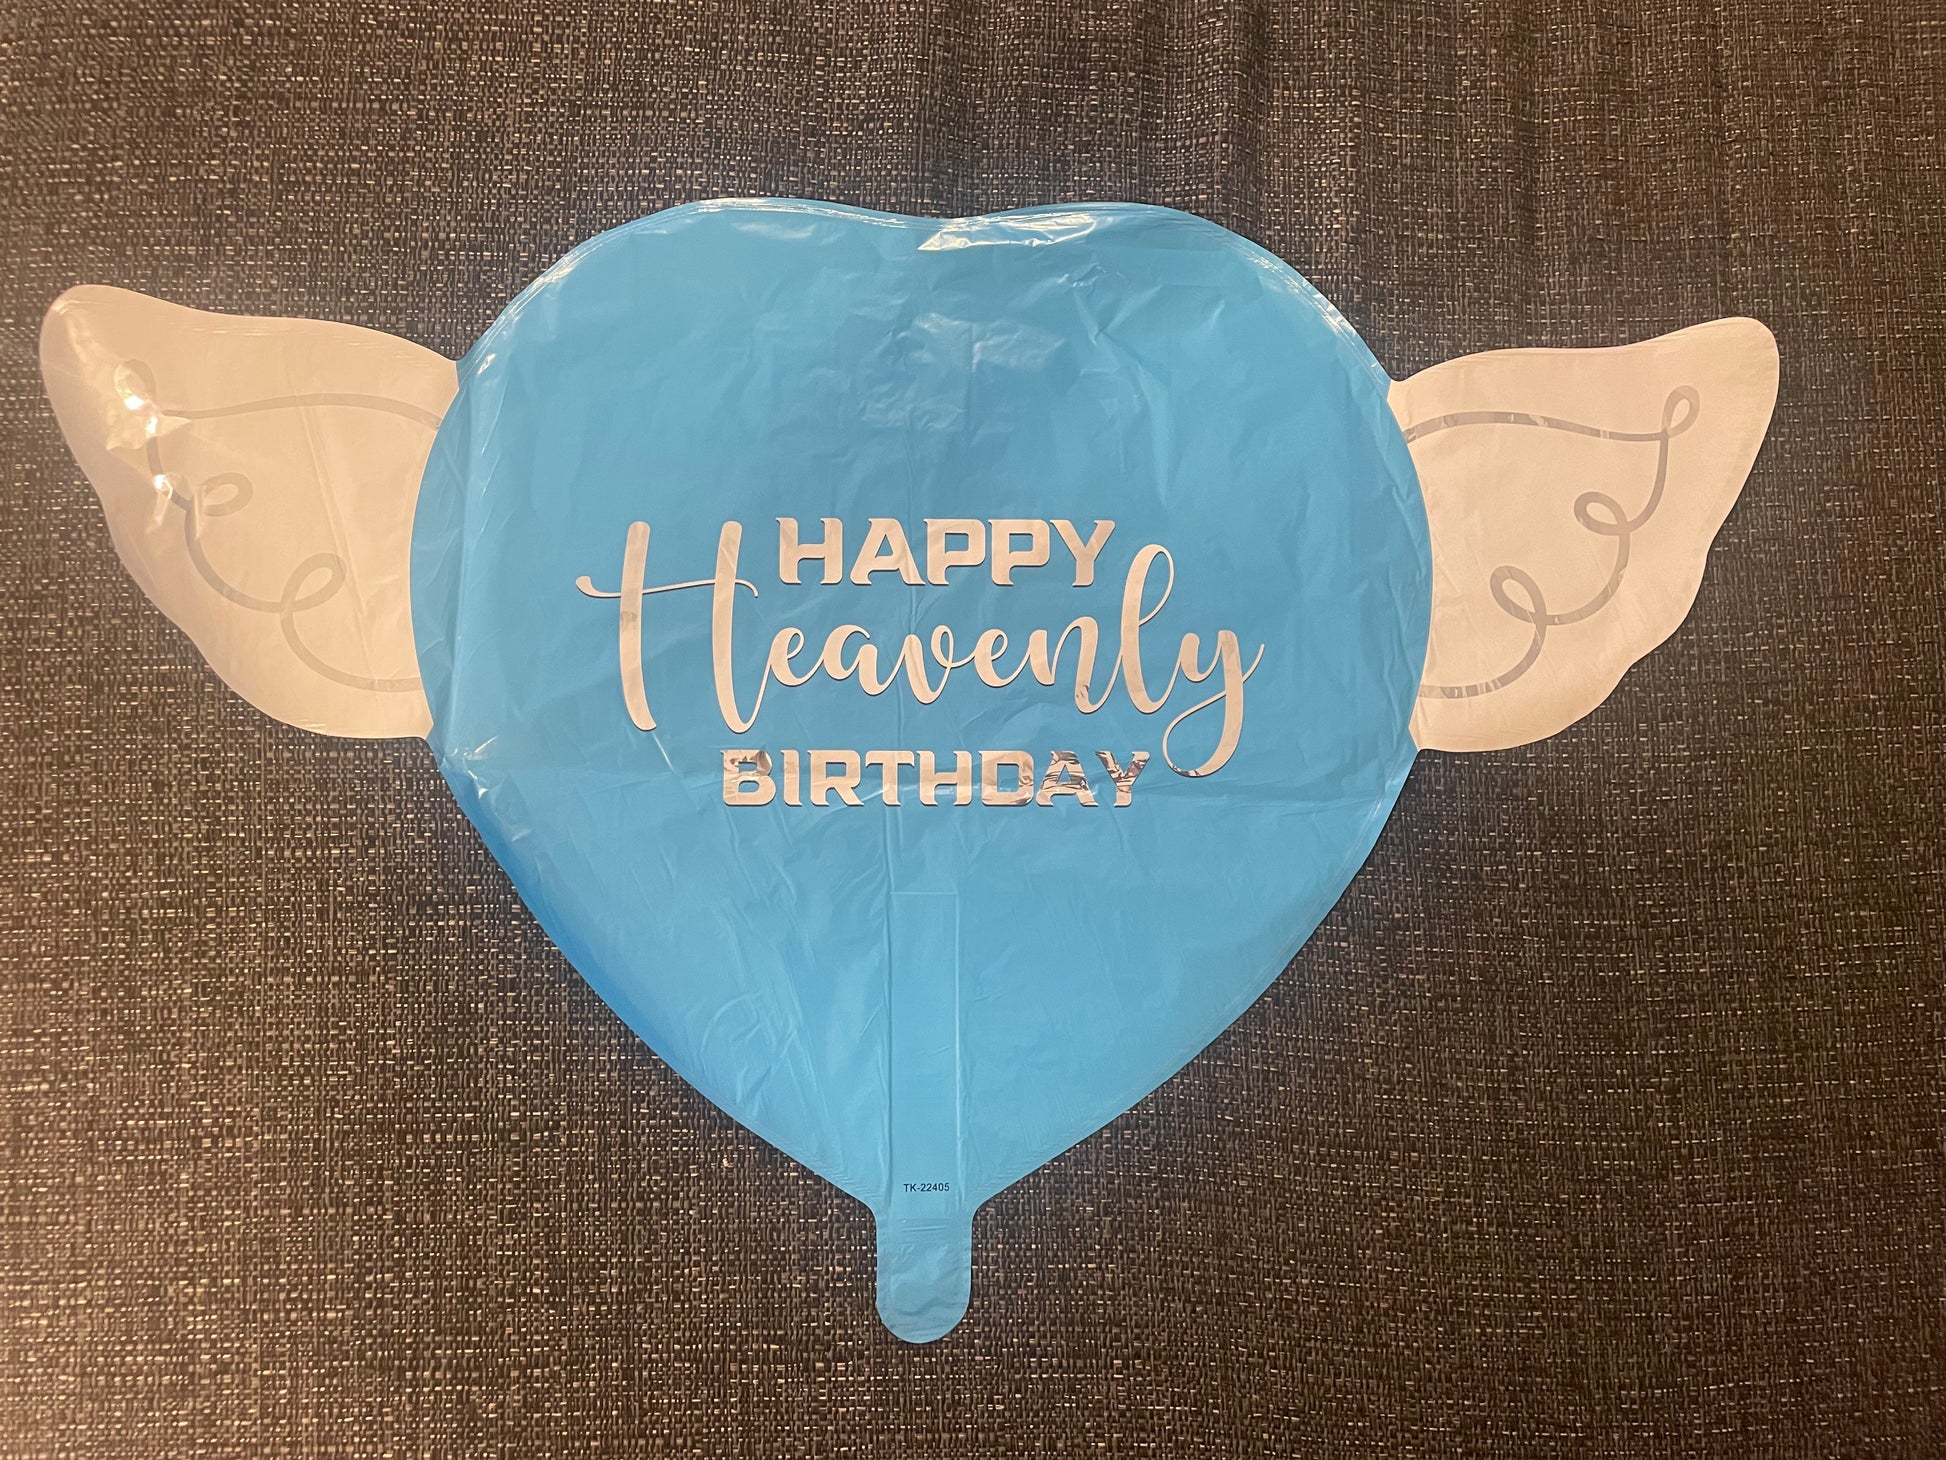 Heart-Shaped Blue Happy Heavenly Birthday Balloon with white angel wings